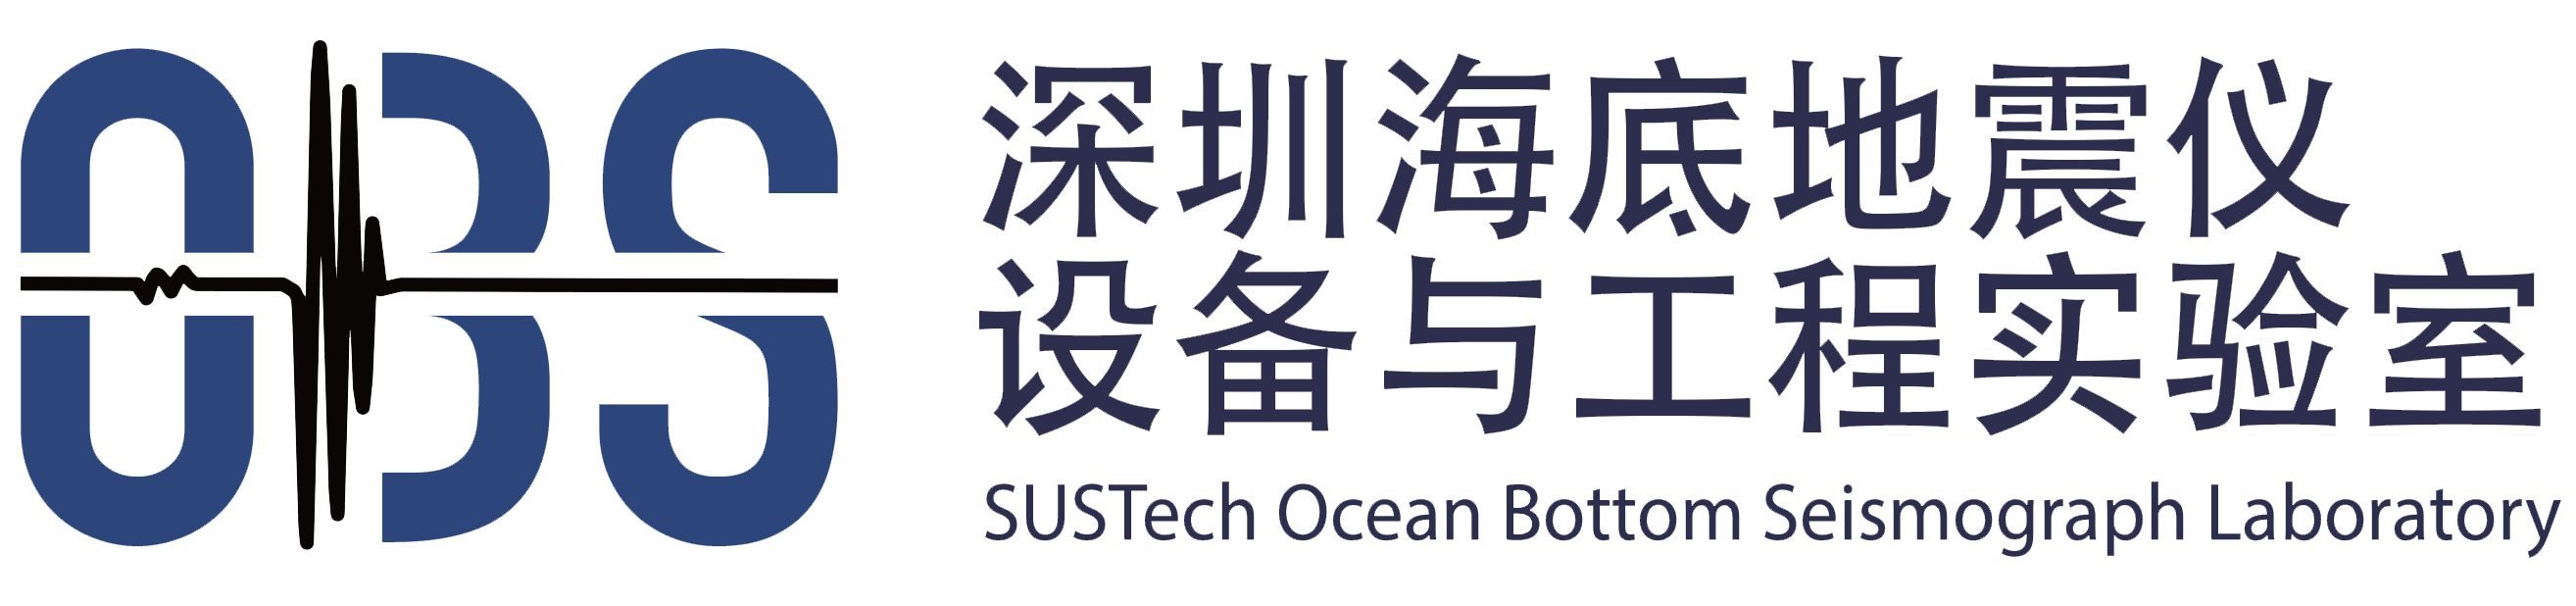 SUSTech OBS Lab